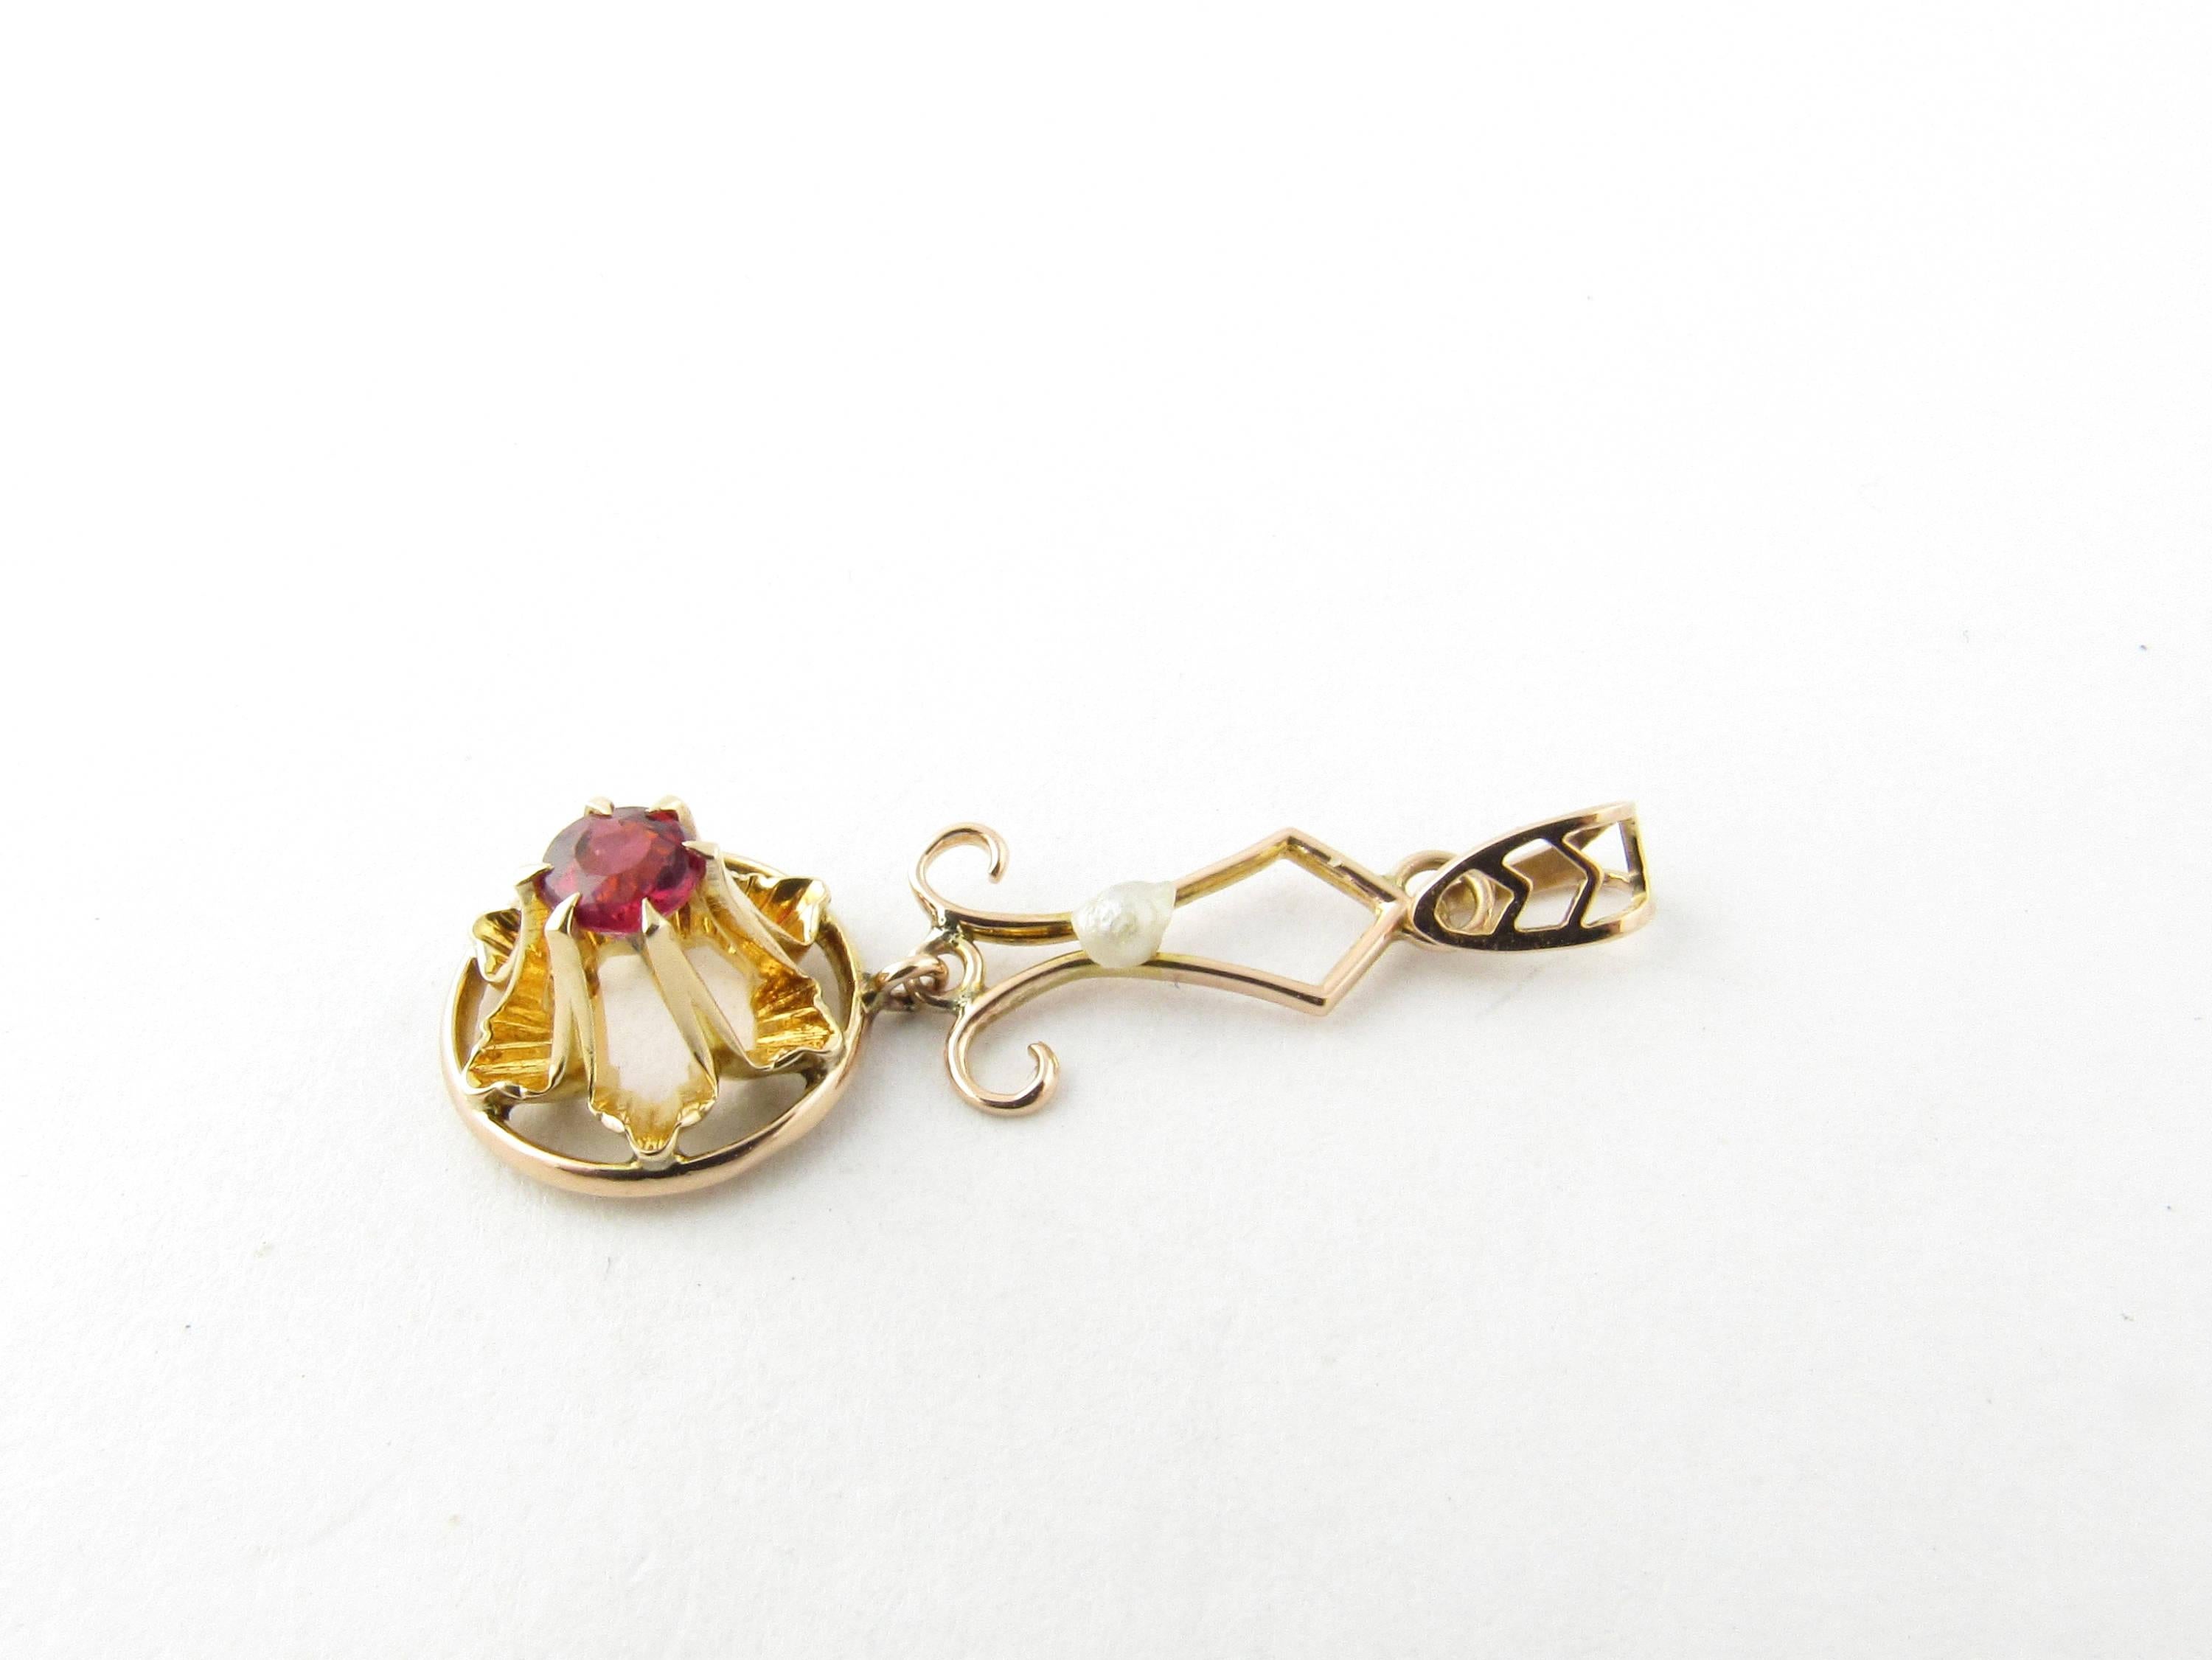 Vintage 10 Karat Yellow Gold Ruby and Pearl Pendant-

This lovely pendant features one round ruby (5 mm) accented with one seed pearl and set in beautifully detailed 10K yellow gold.

Size: 22 mm x 10 mm (actual pendant)

Weight: 0.5 dwt. / 0.9